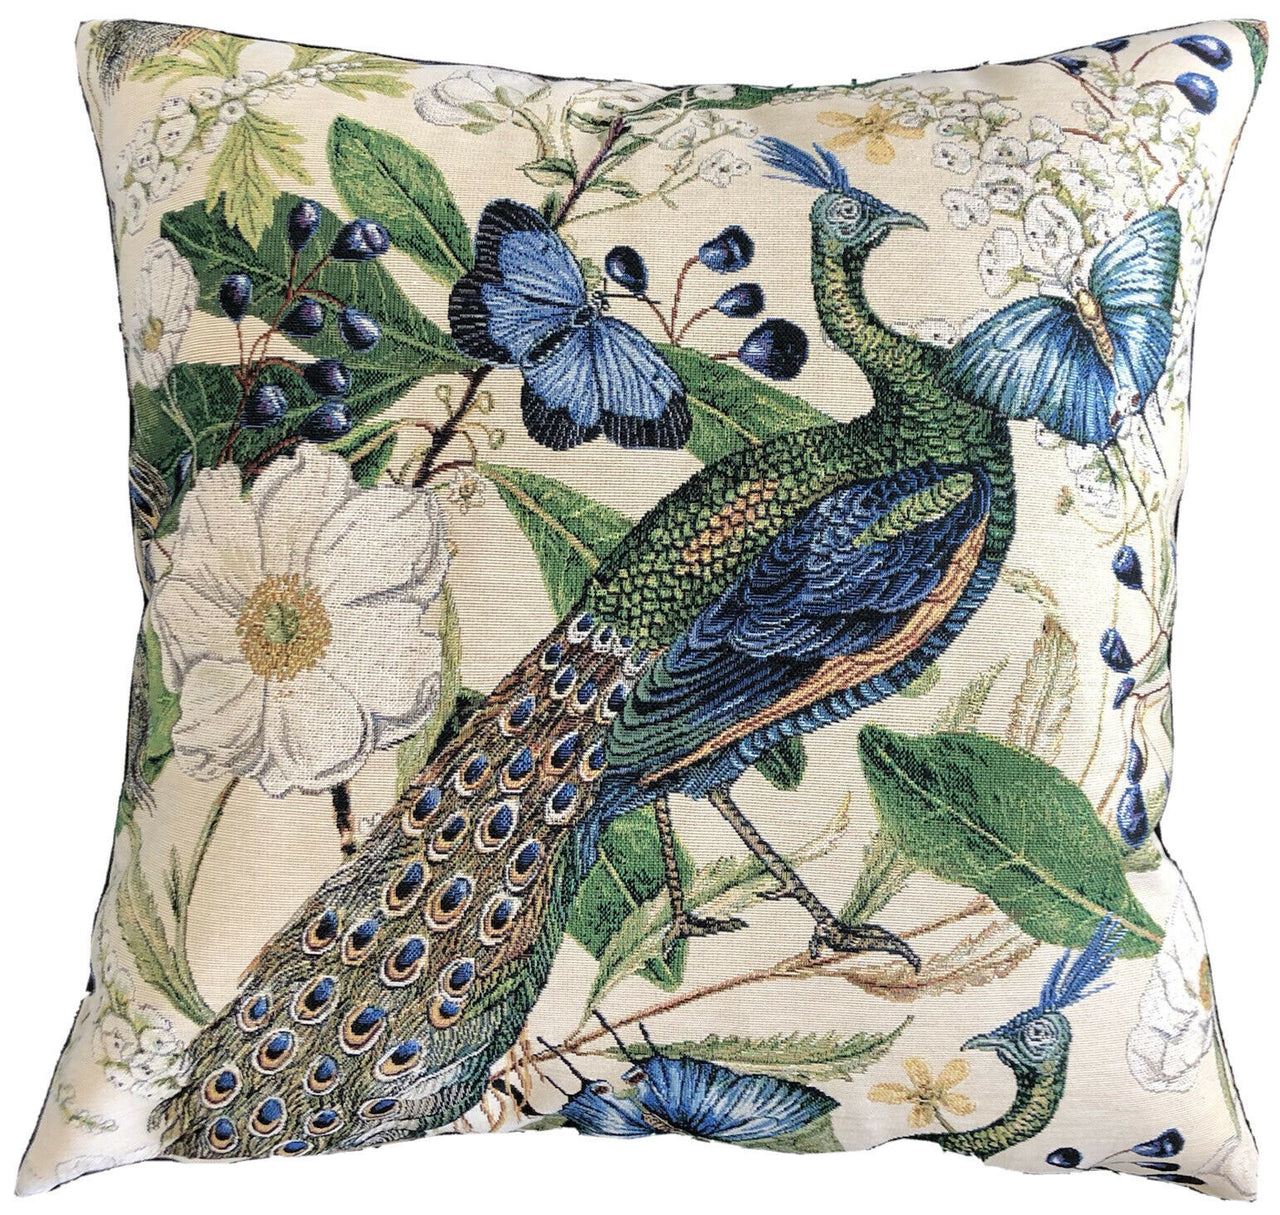 Beige Peacock Fabric Cushion Cover Green Blue Green Butterfly Floral 22"